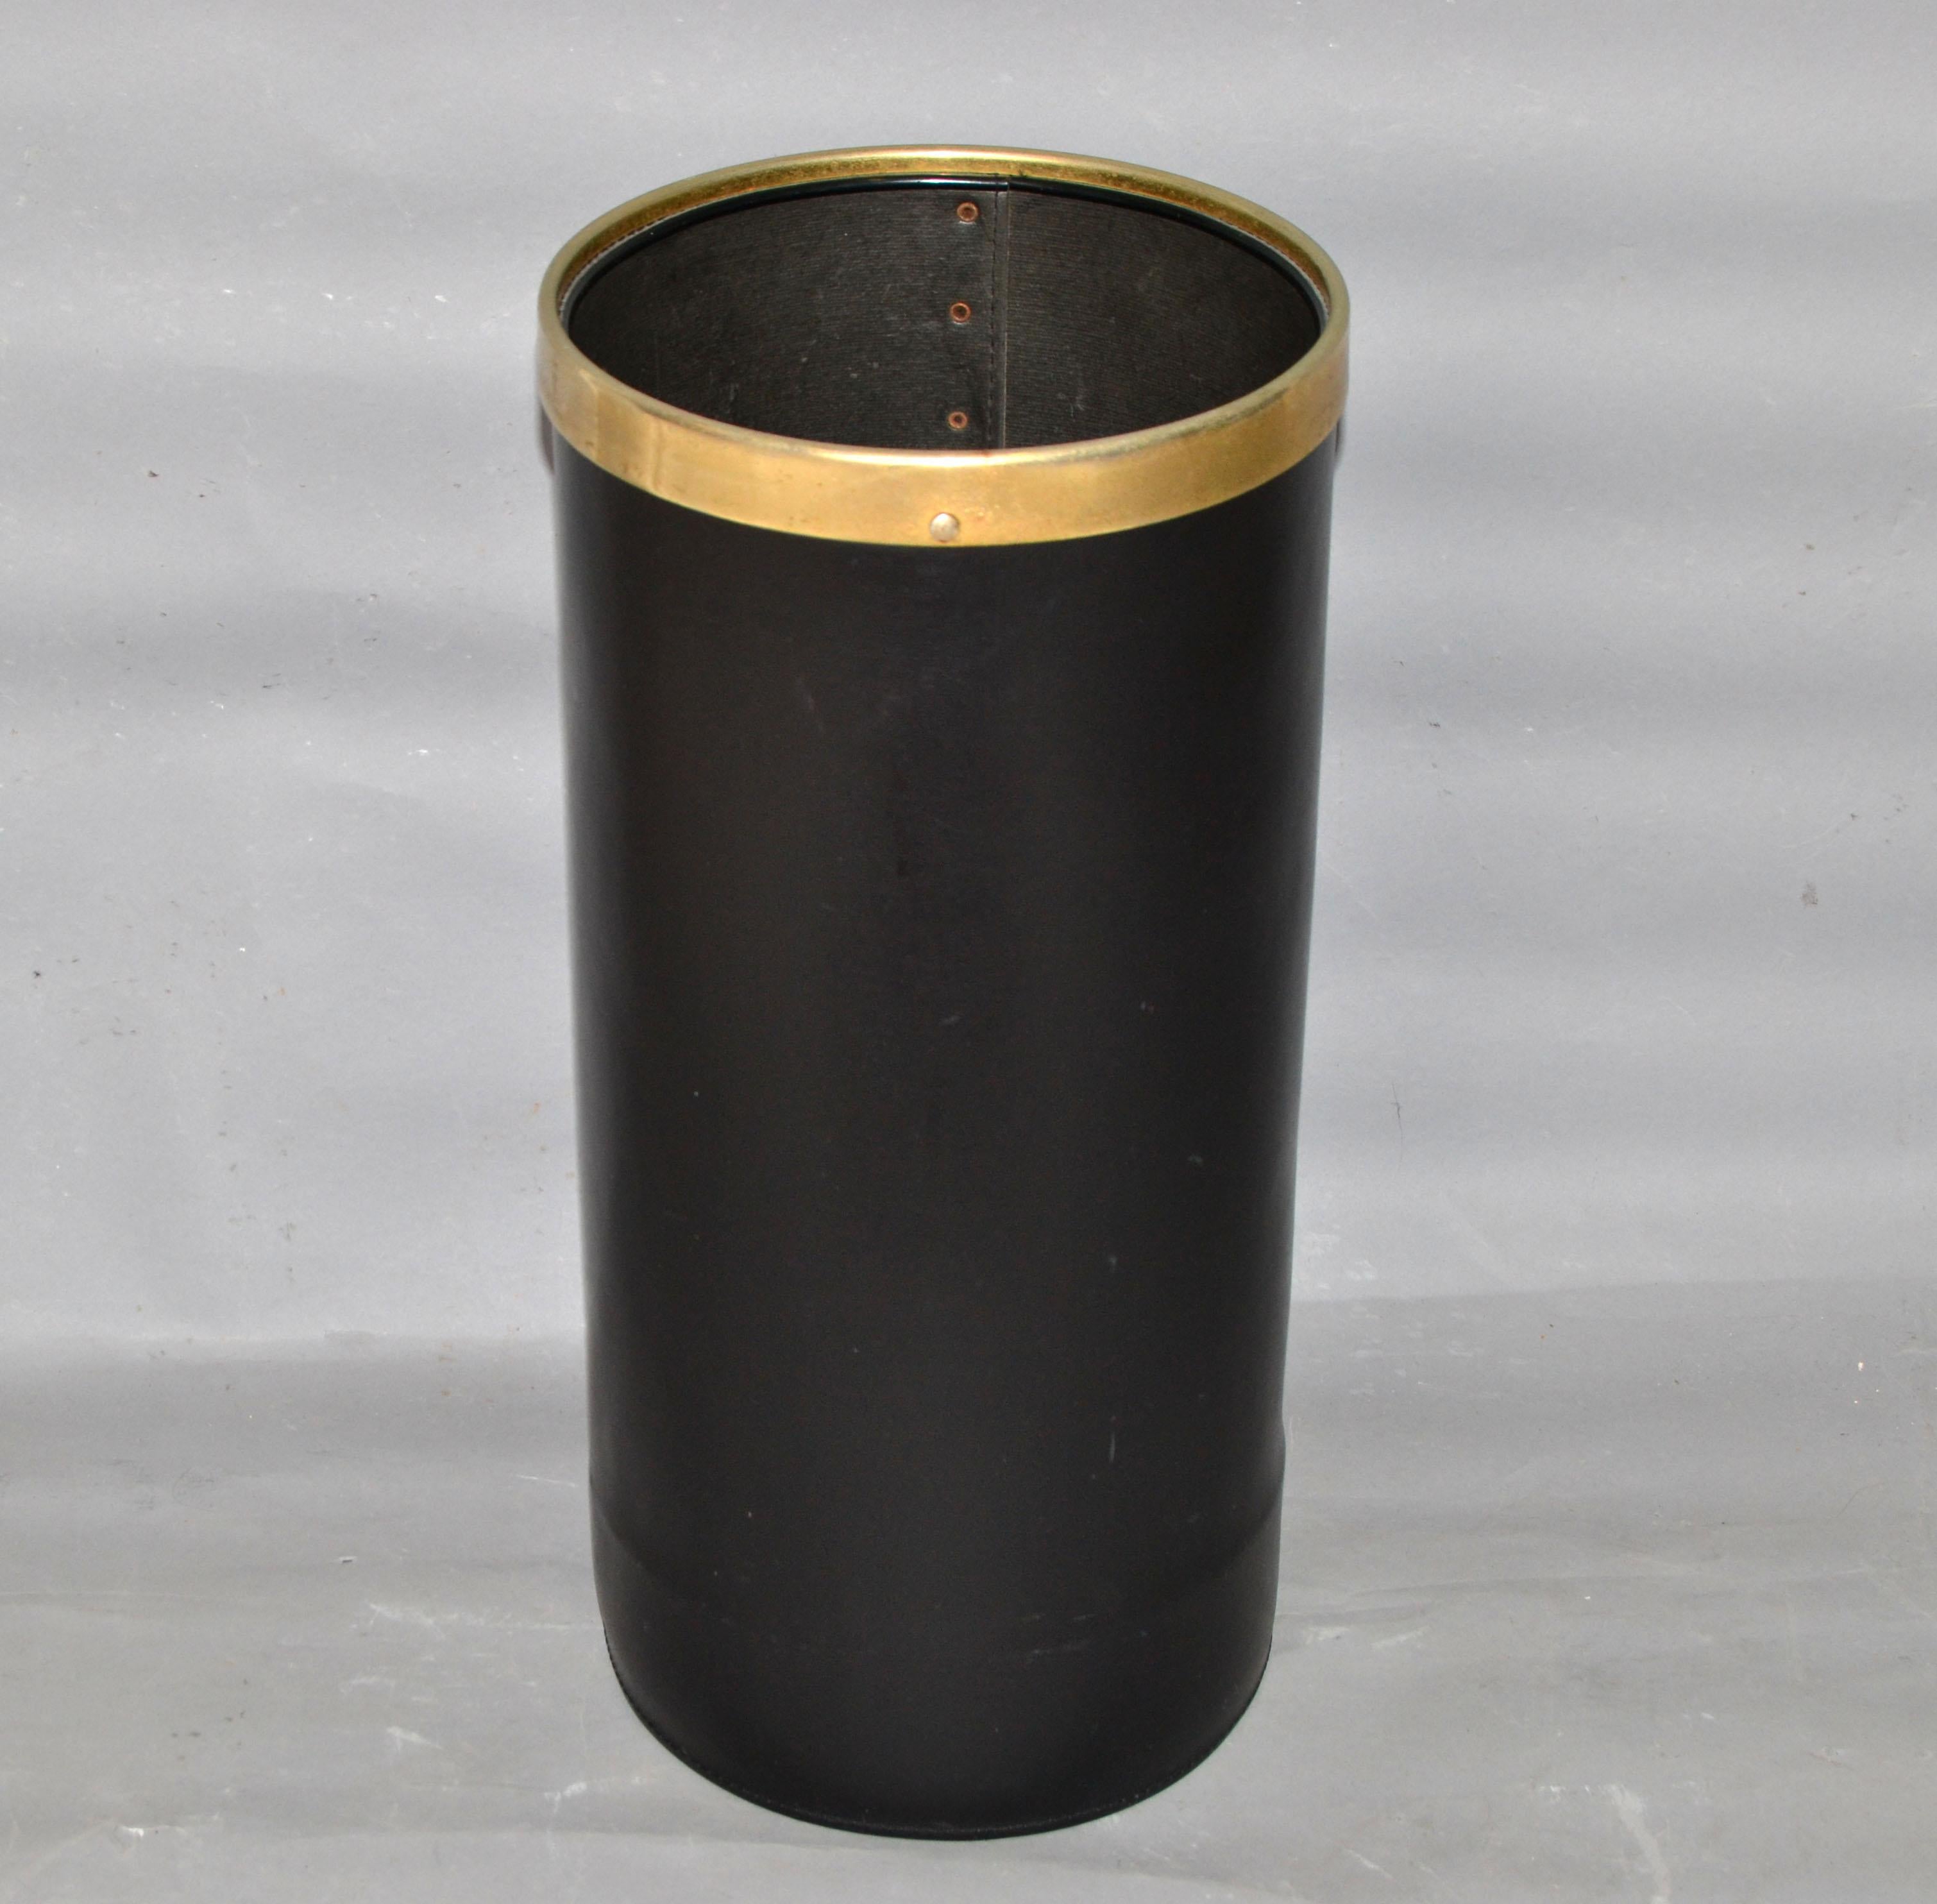 Jacques Adnet style Mid-Century Modern waste basket or umbrella stand in faux leather with brass border and studs.
It was made in France in the late 1950s.
As Minimalism as practical.